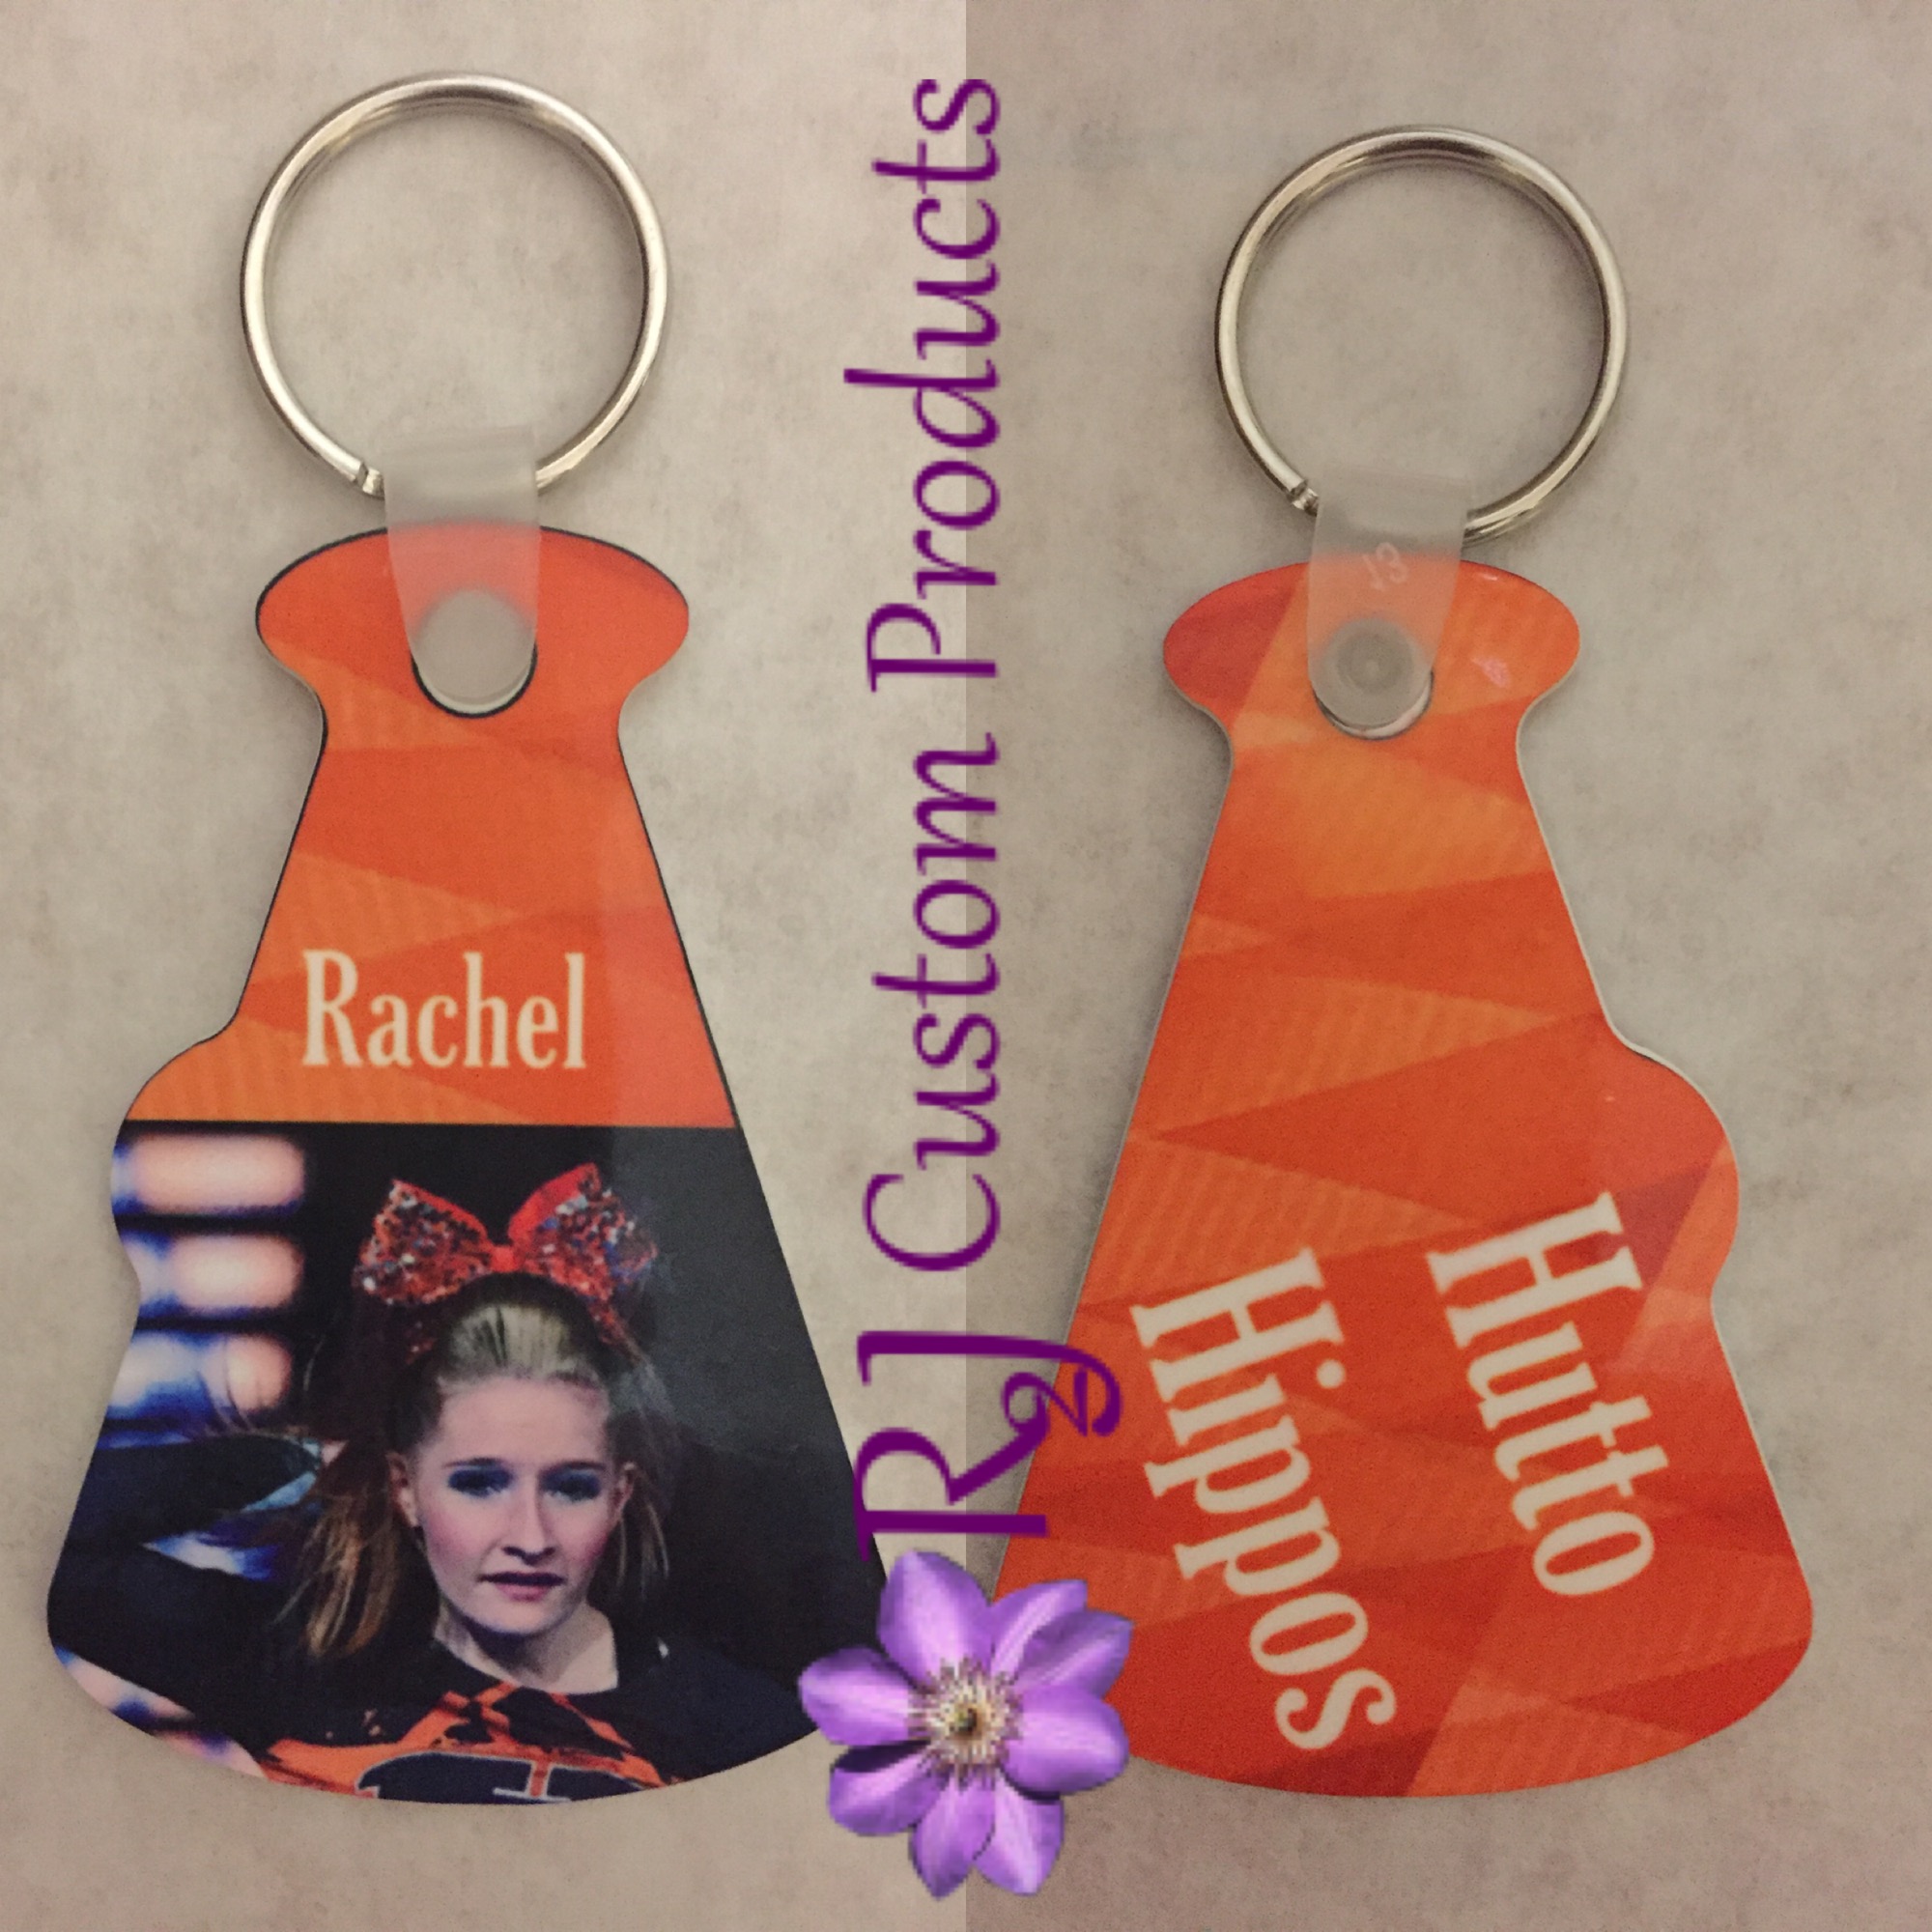 Cheer key tag made with sublimation printing